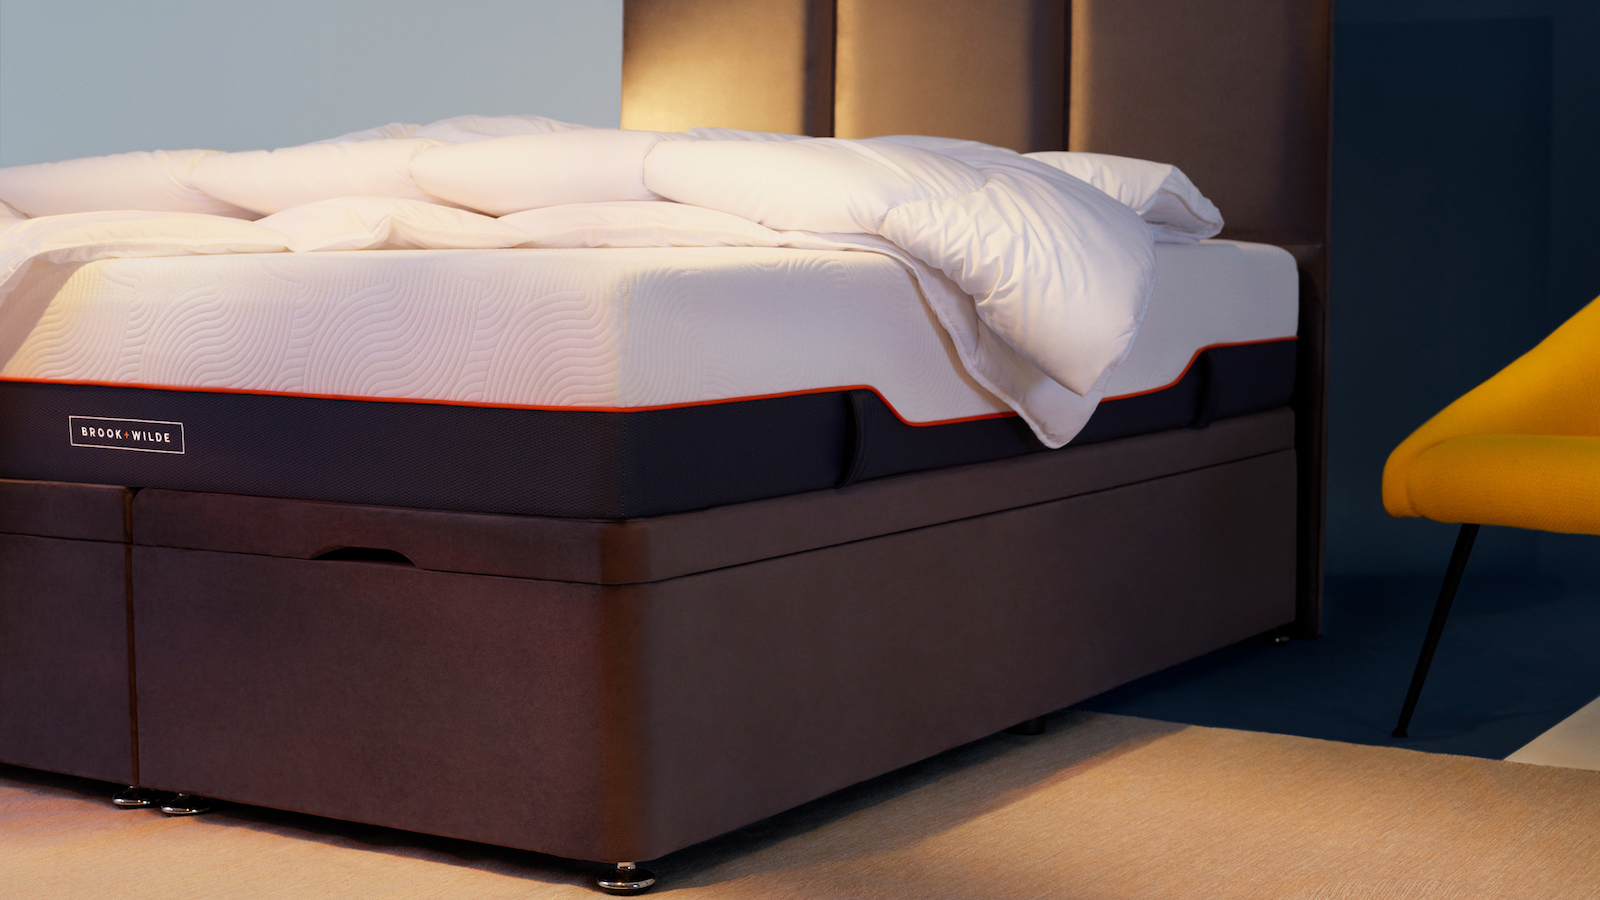 Brook + Wilde Lux mattress review 2022: hotel luxury for less